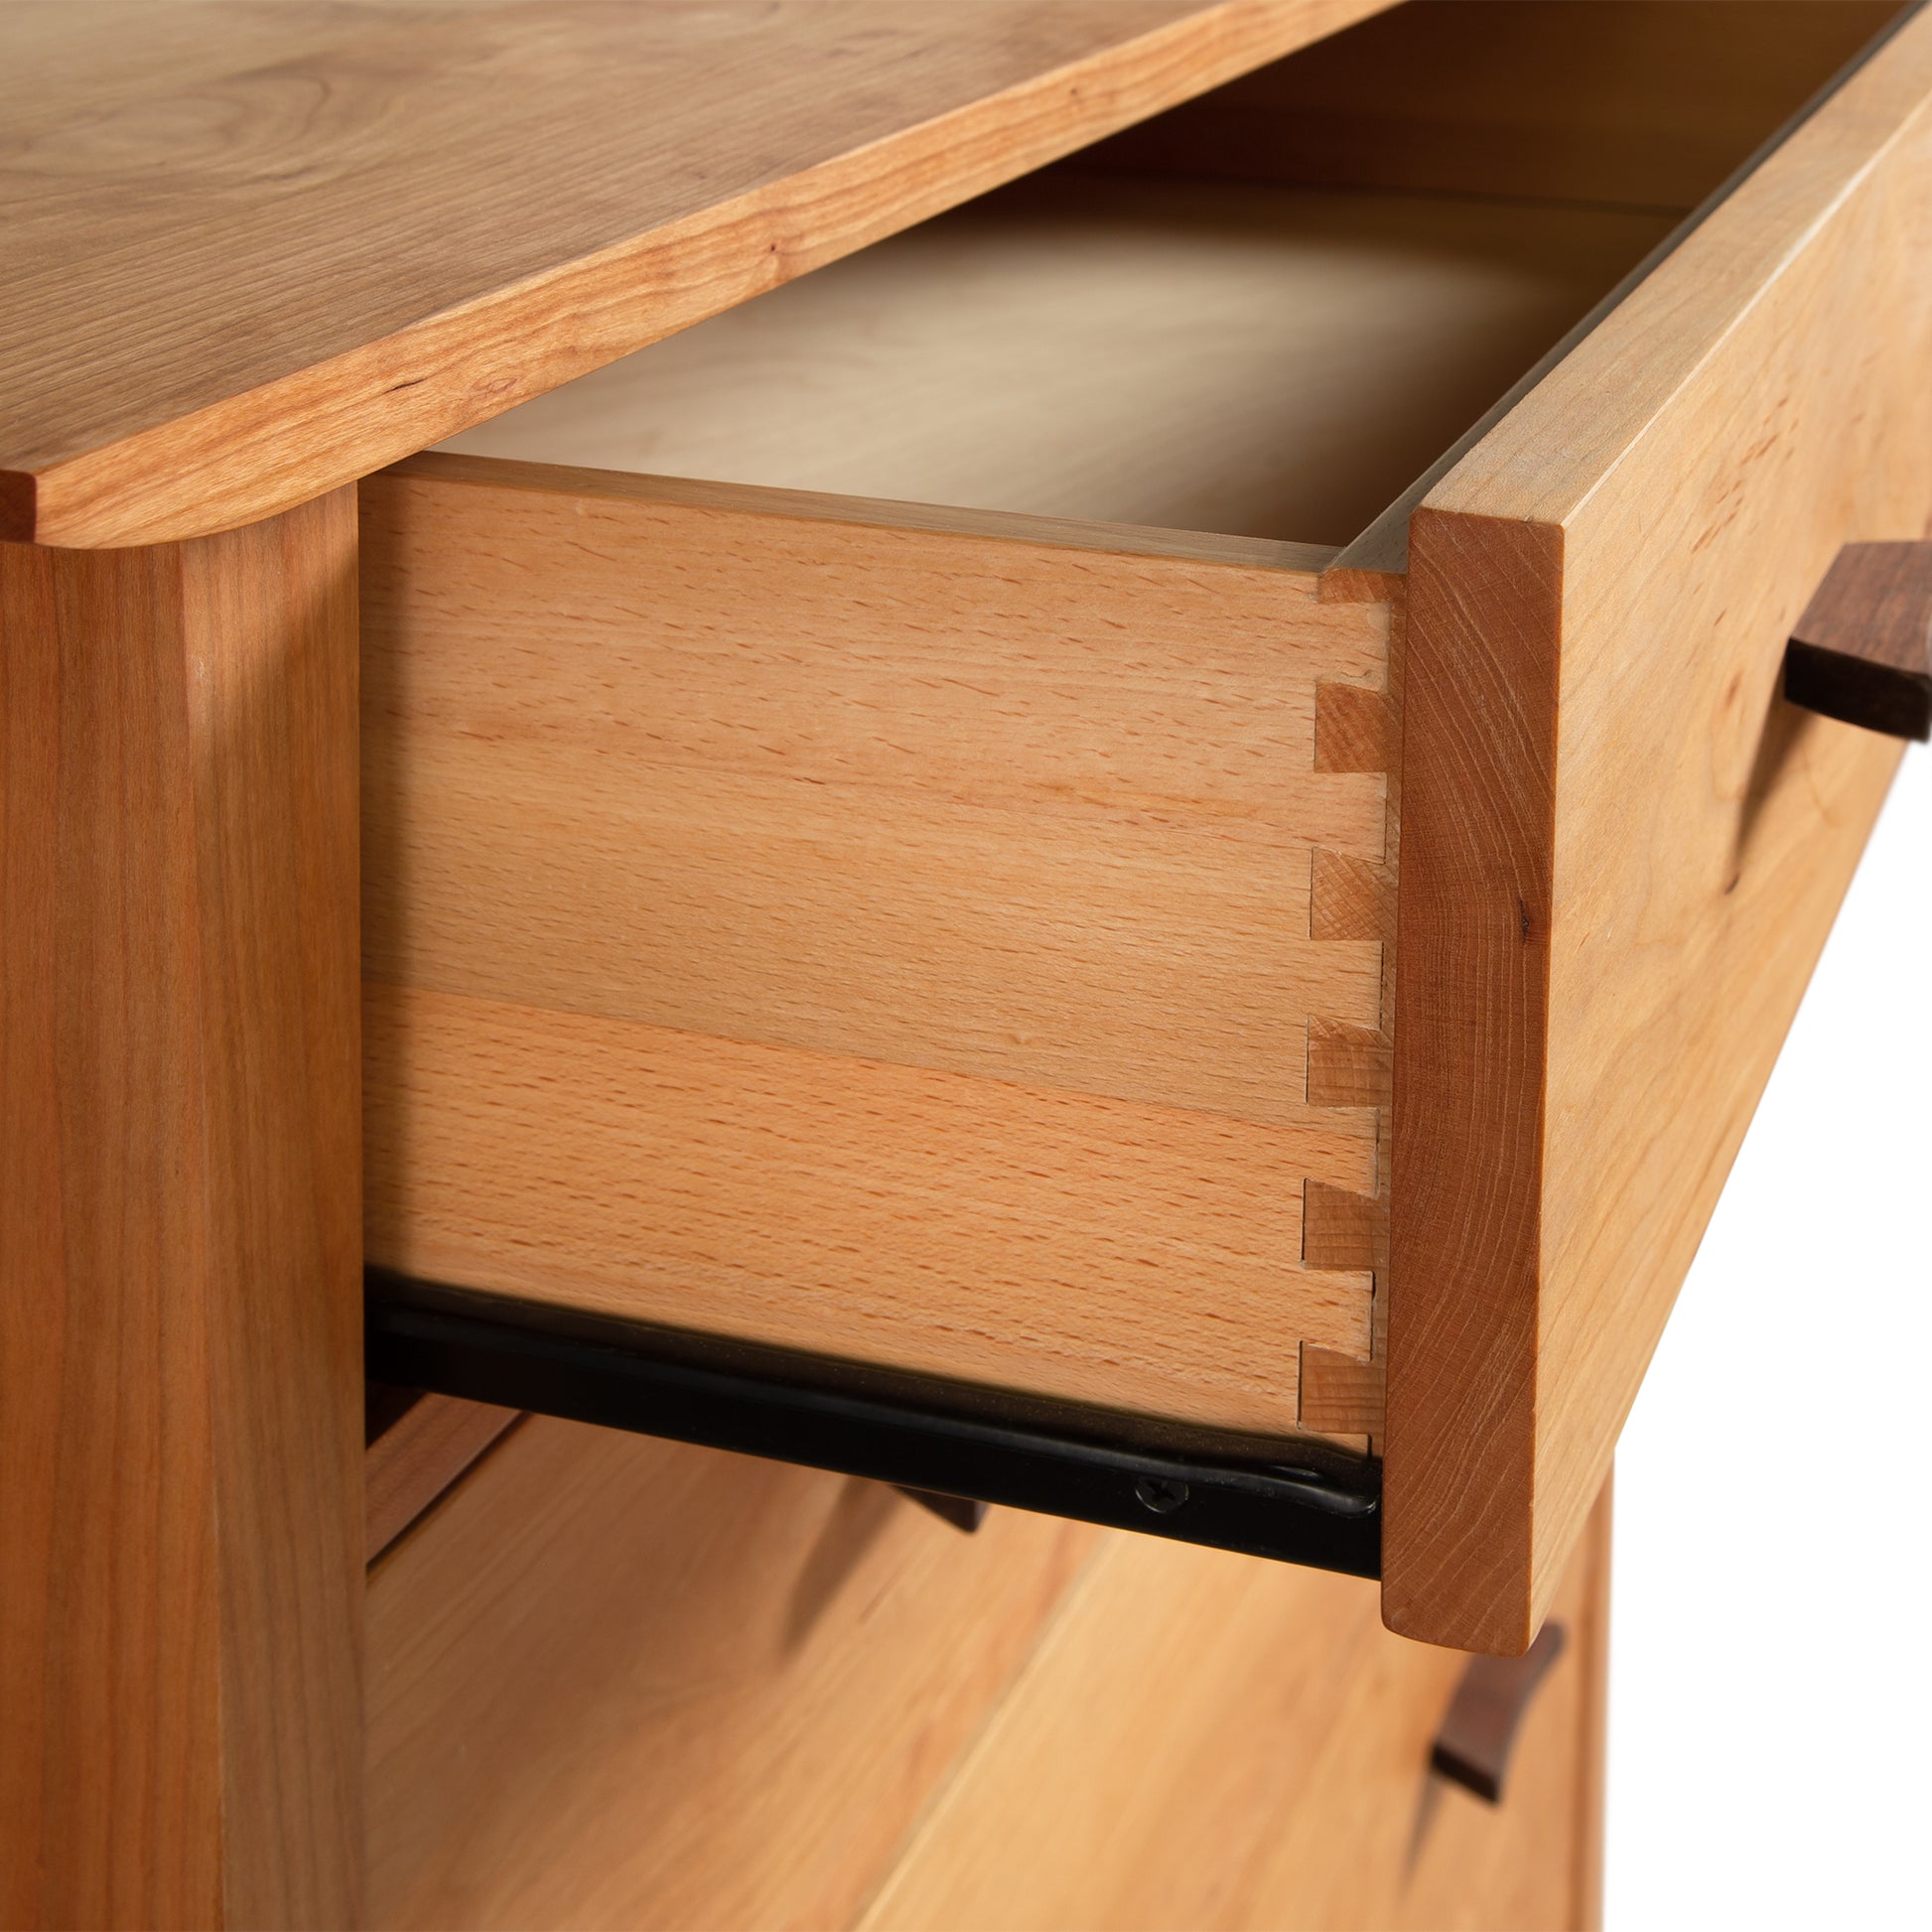 Open wooden drawer showing dovetail joints and a metal slide mechanism in a Vermont Furniture Designs Contemporary Craftsman 5-Drawer Chest.